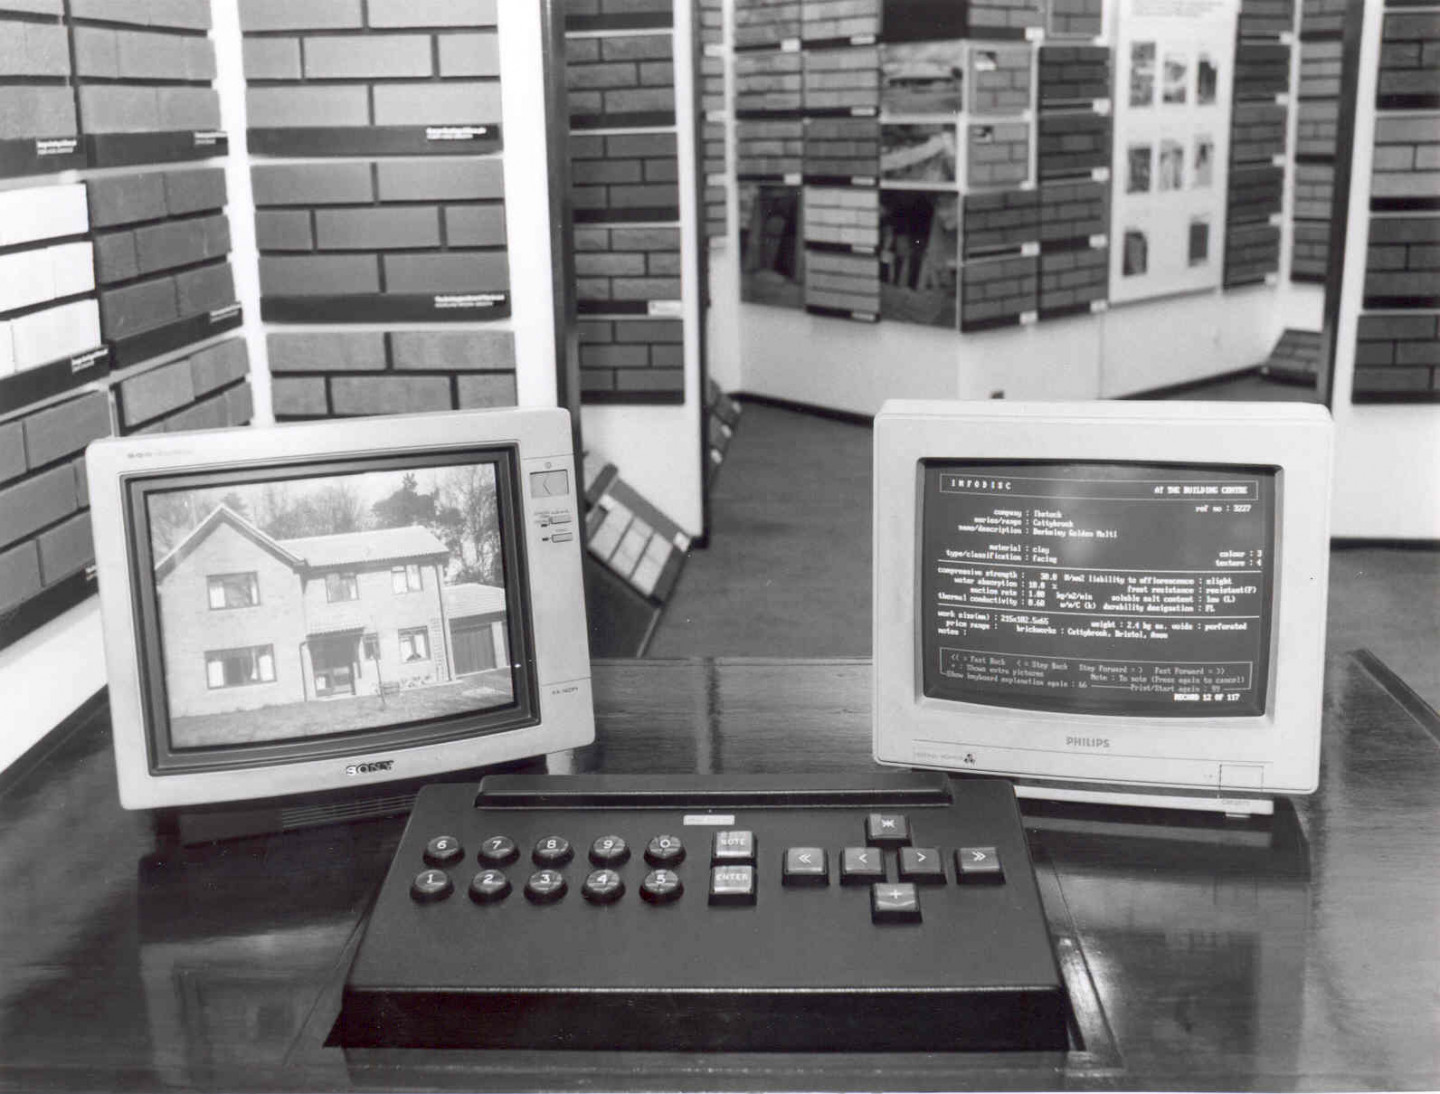 InfoDisc at the Building Centre, 1980s © Building Centre